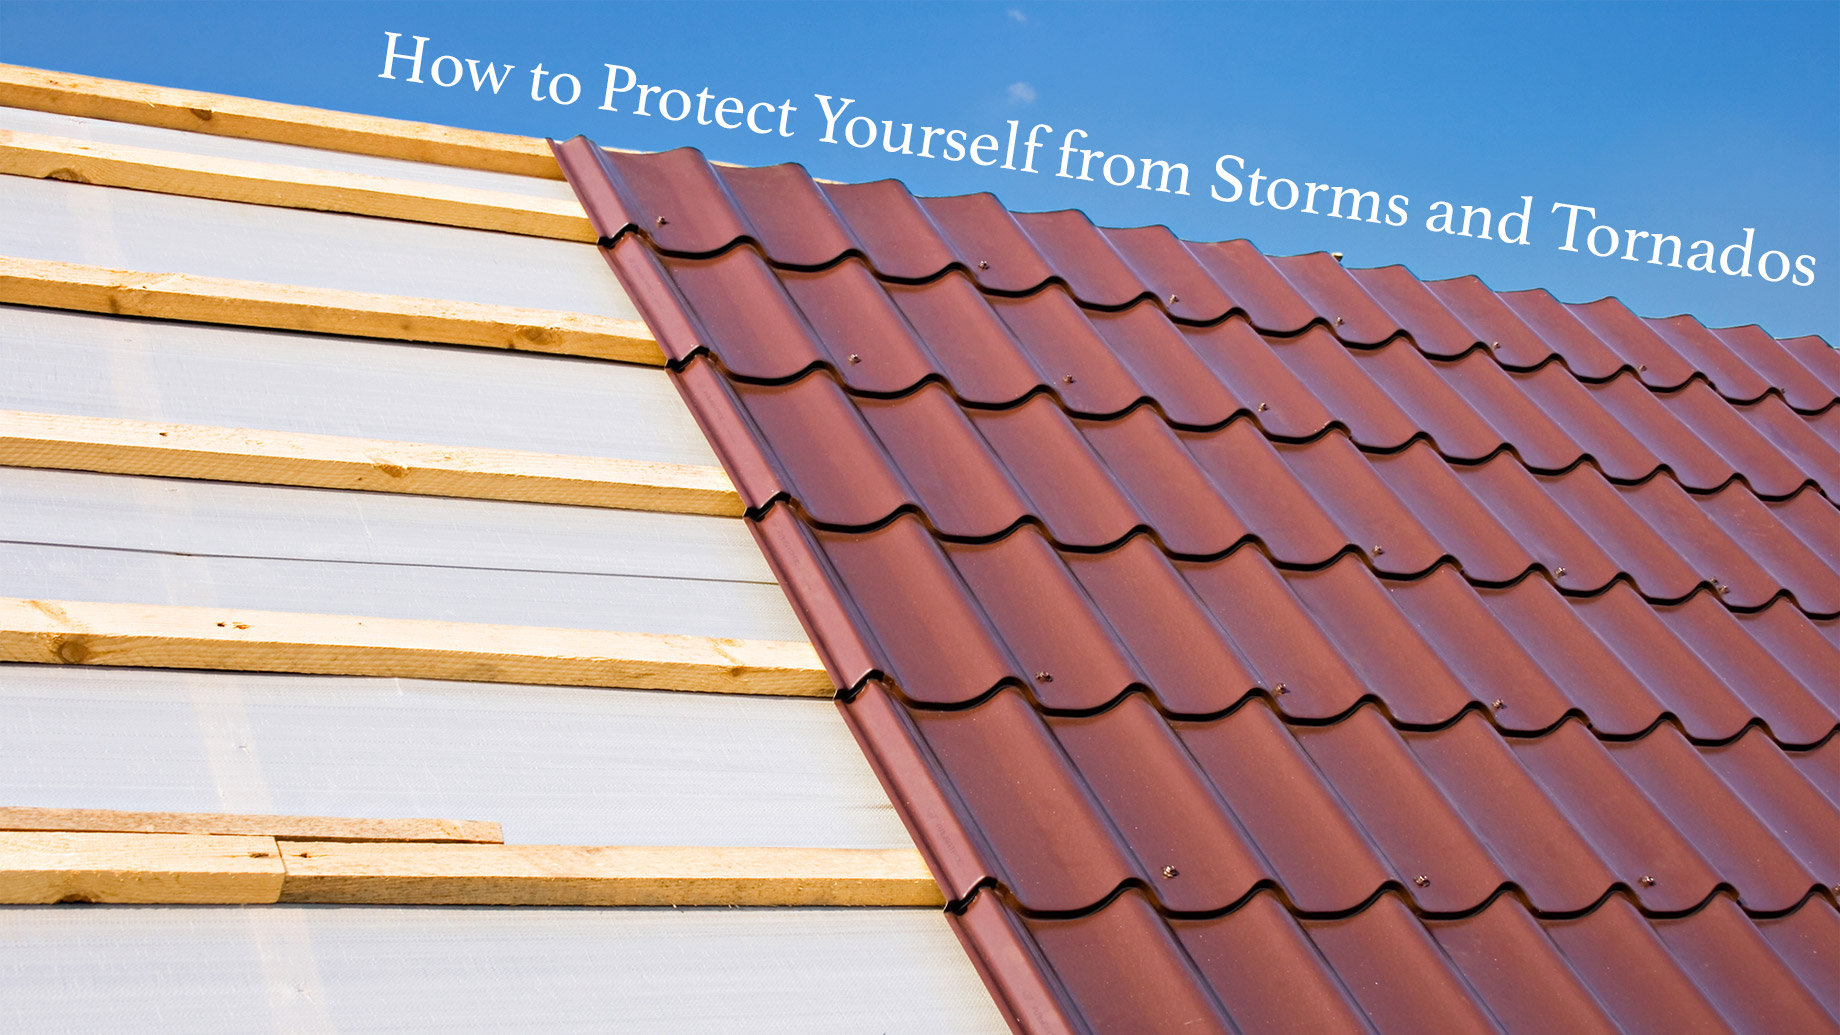 How to Protect Yourself from Storms and Tornados